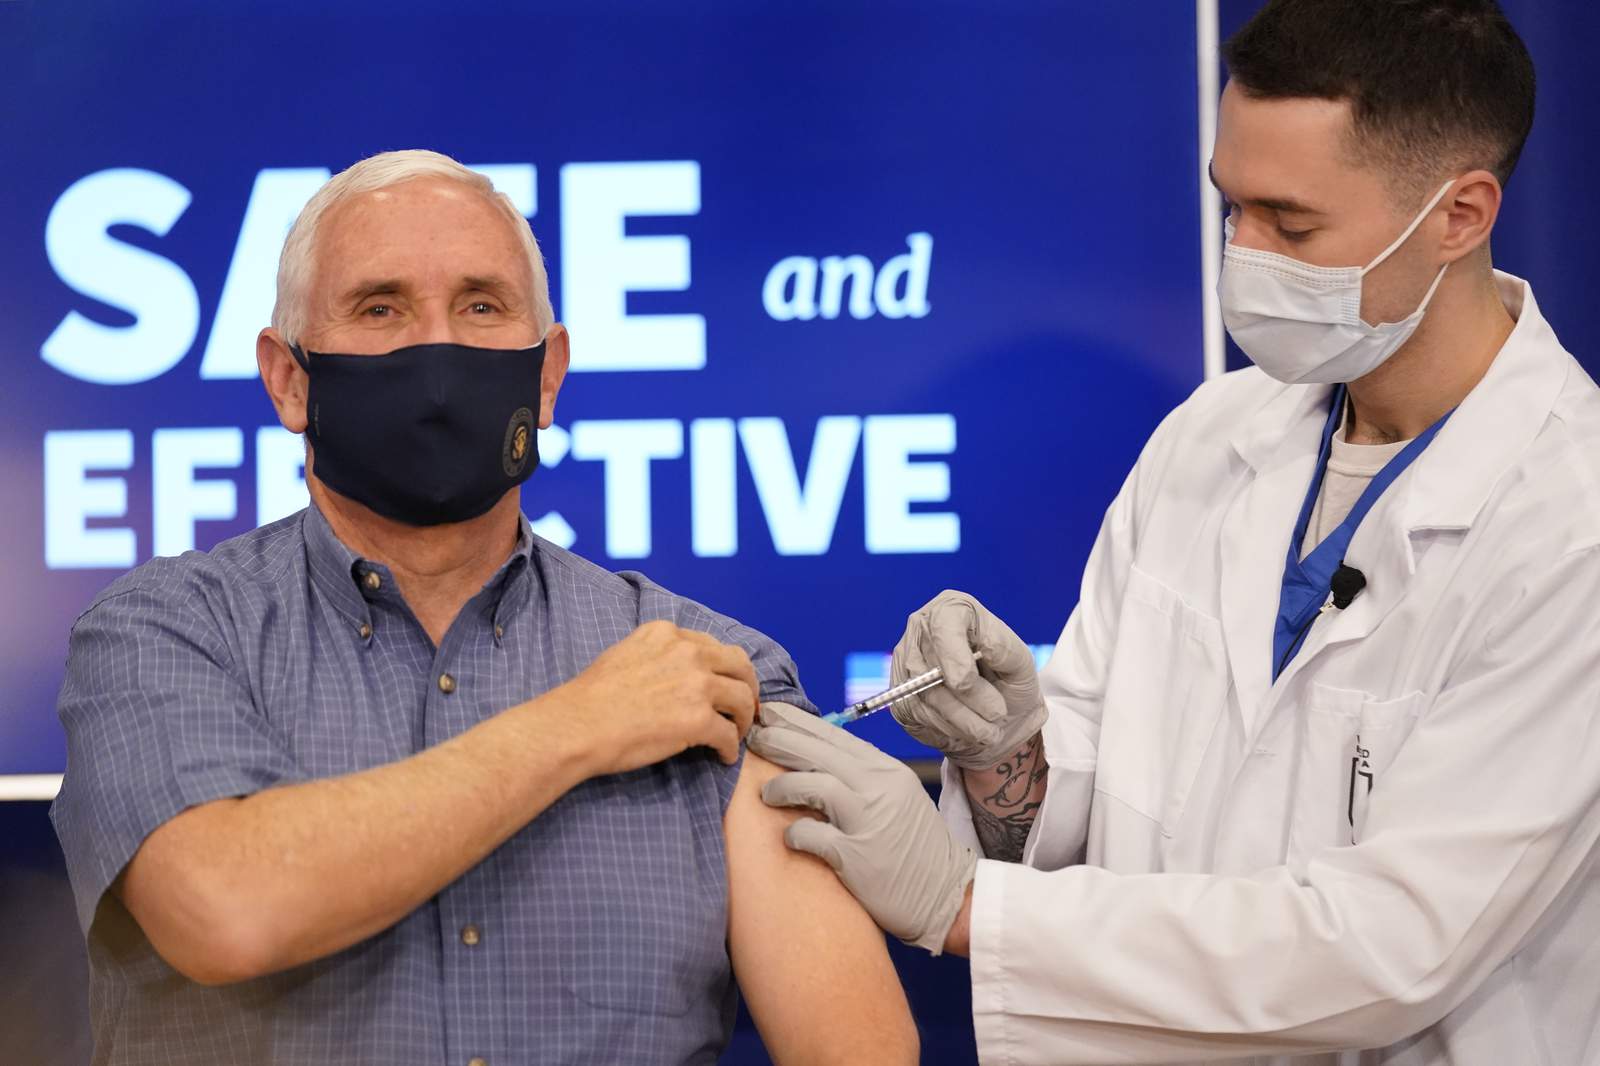 Vice President Mike Pence, wife get COVID-19 vaccine injections